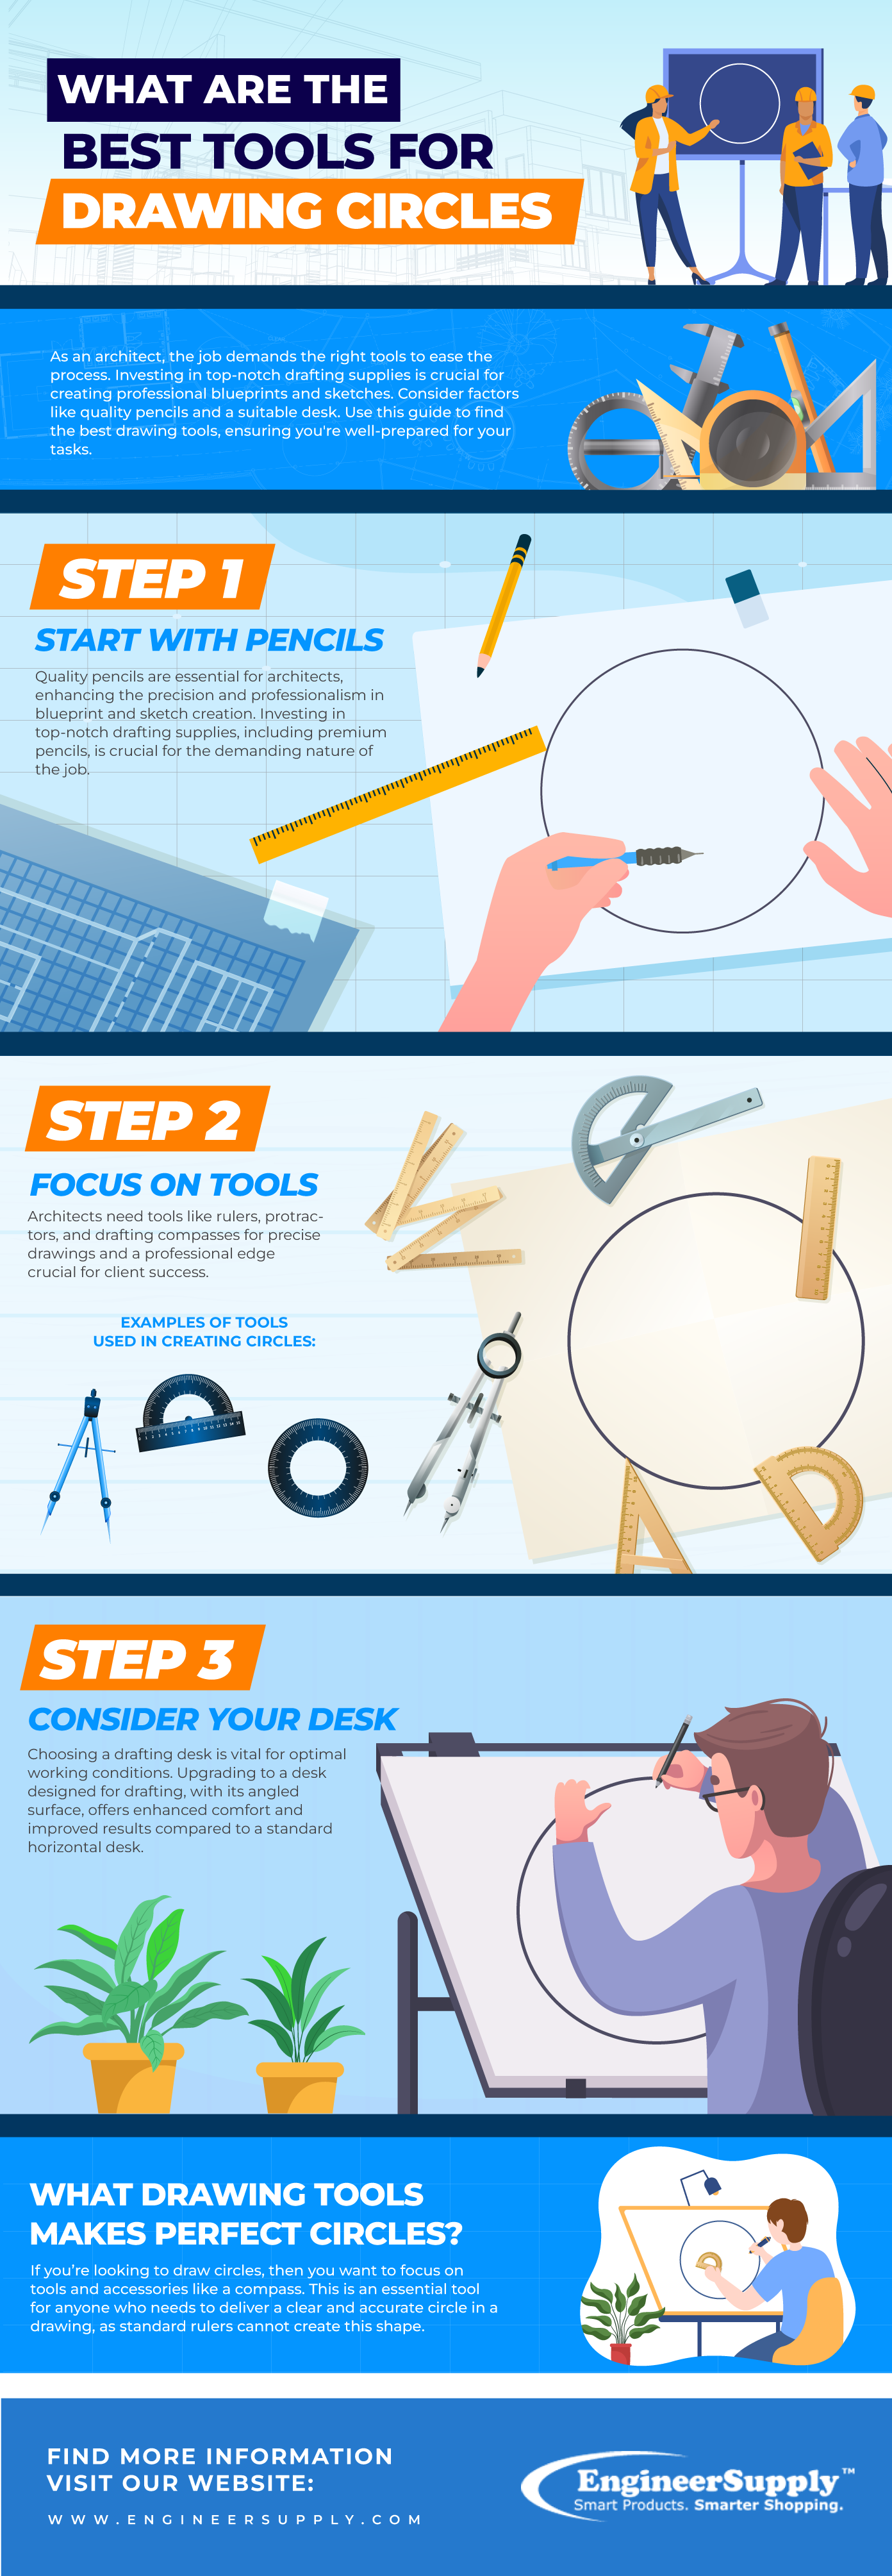 What are the best tools for drawing circles infographic